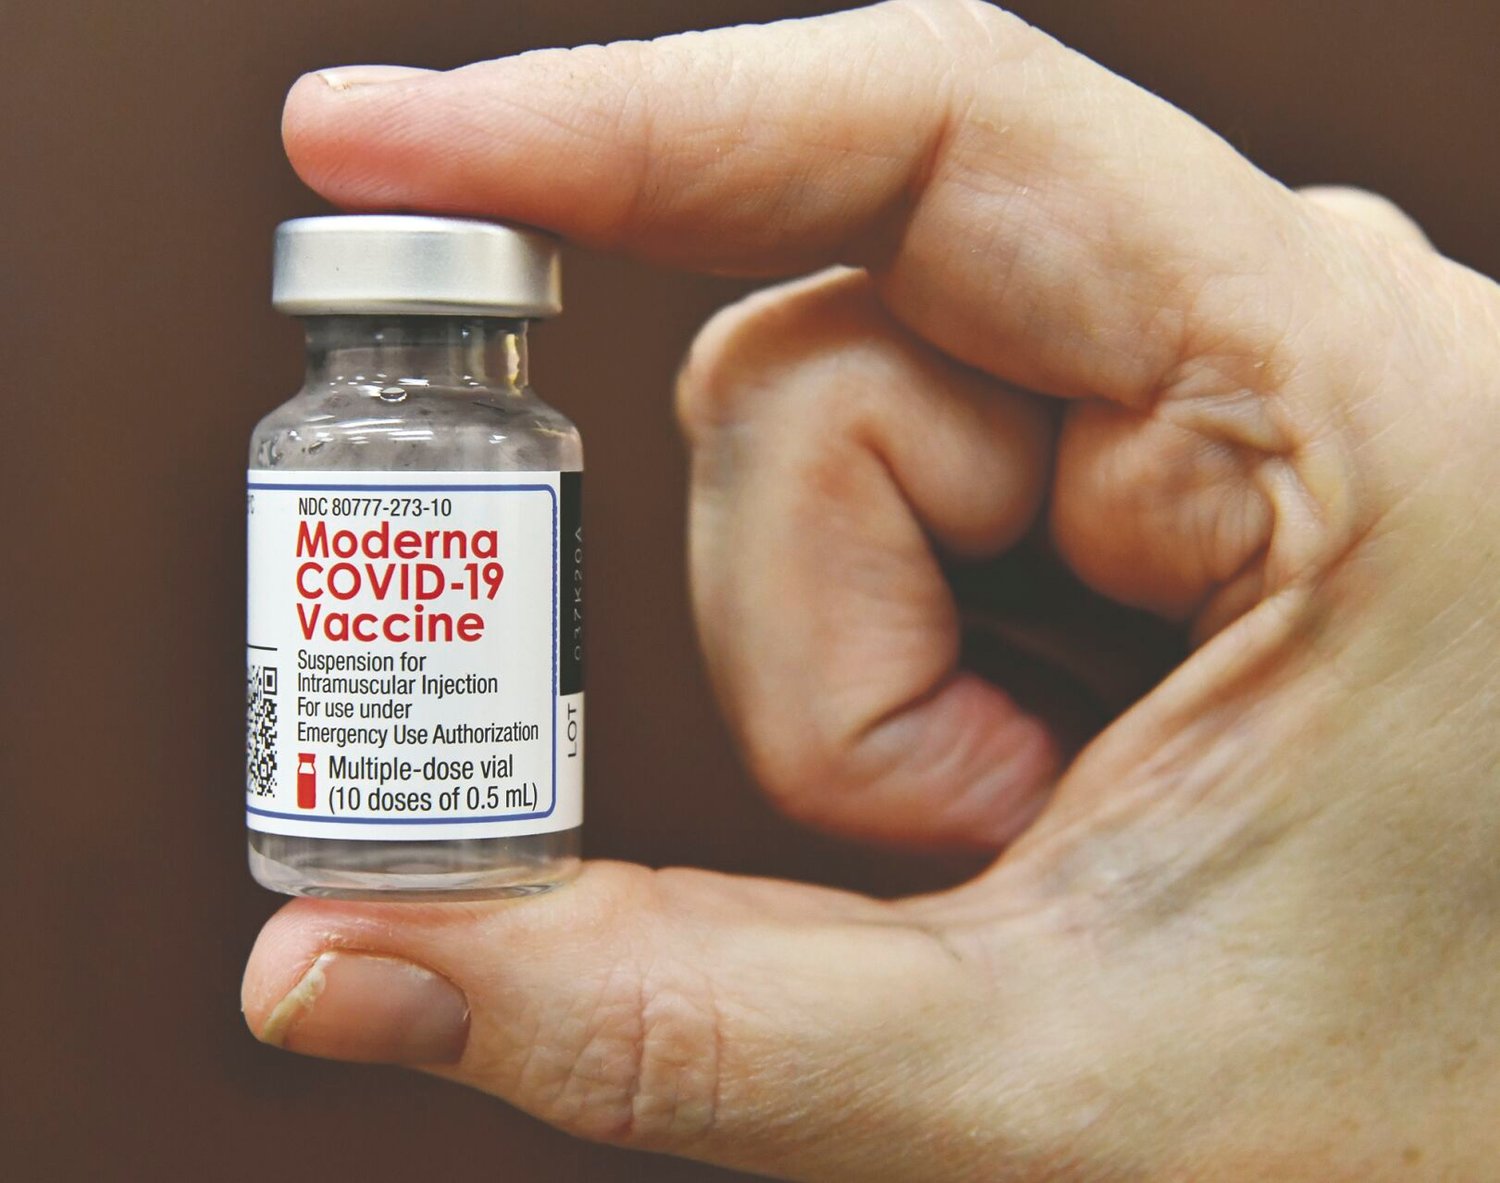 A multiple-dose vial of the Moderna COVID-19 vaccine is pictured.